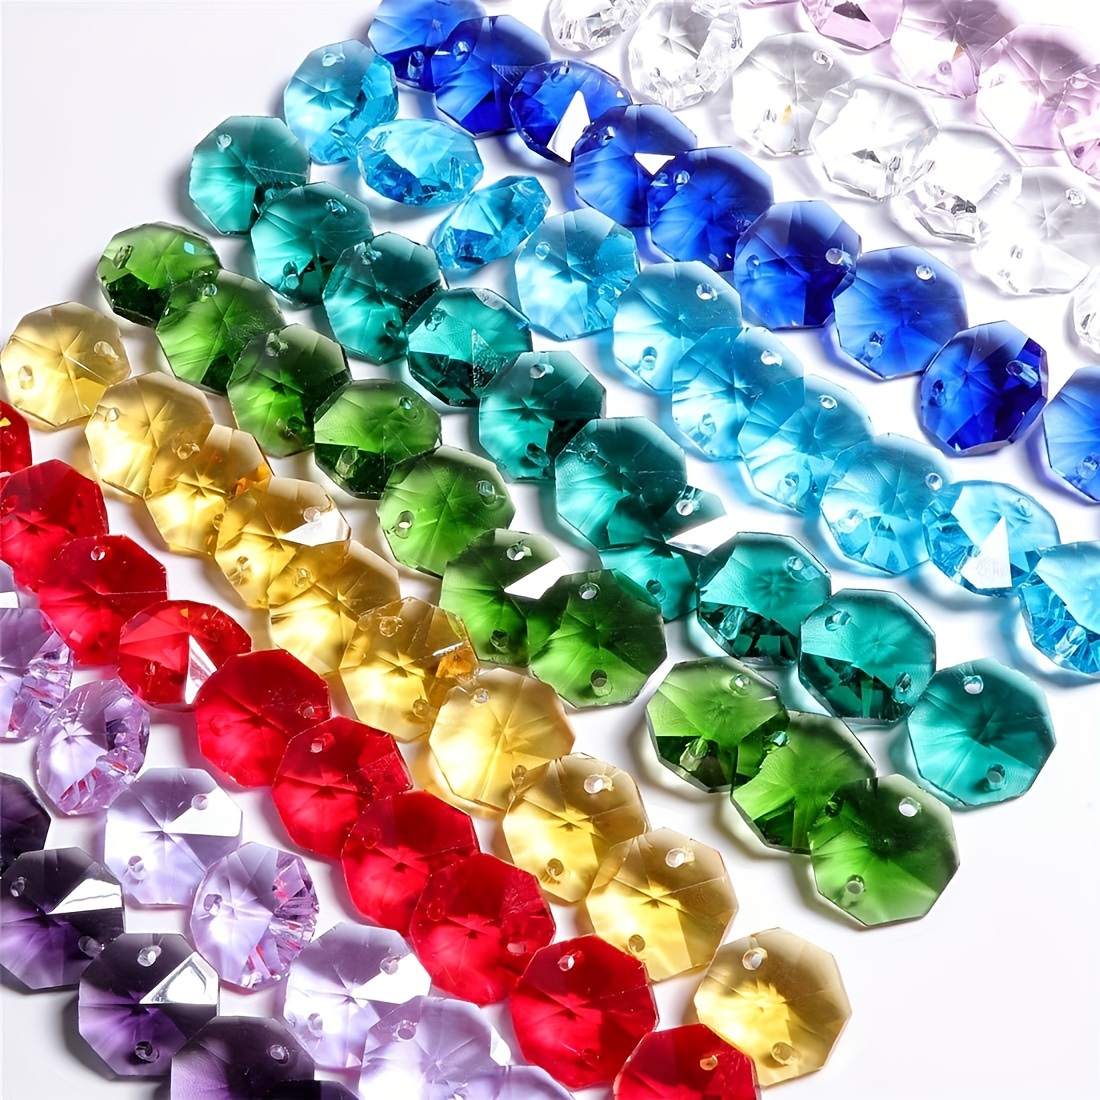 

14mm Multicolor Octagon Crystal Beads - Diy Chandelier Prism Replacement, Acrylic Pendant For Home Decor & Outdoor Accessories